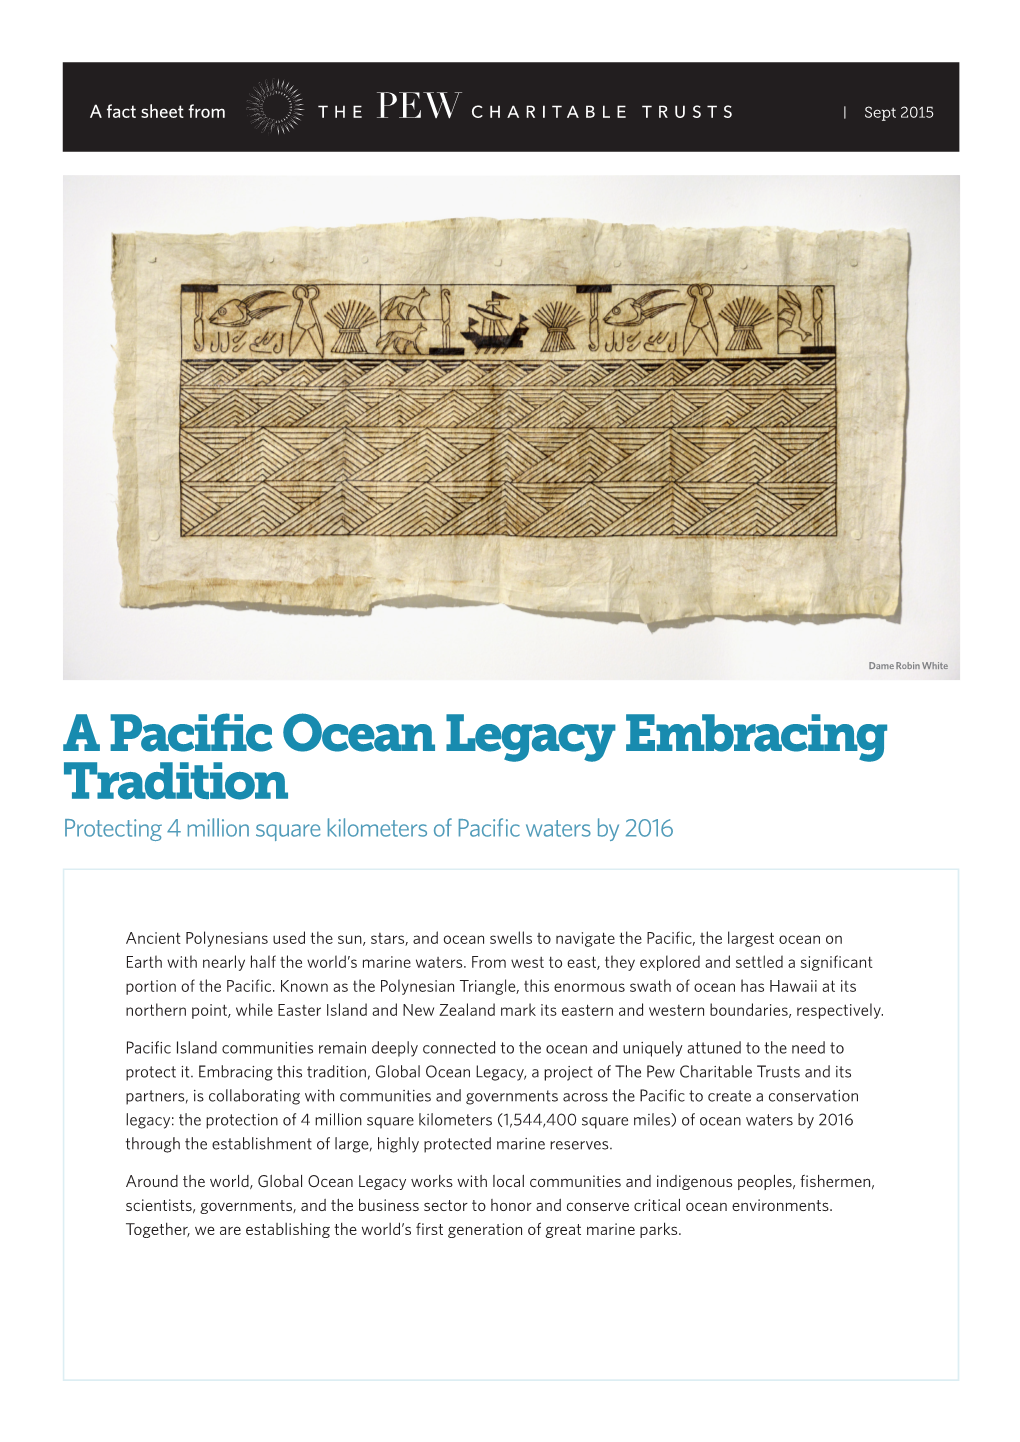 A Pacific Ocean Legacy Embracing Tradition Protecting 4 Million Square Kilometers of Pacific Waters by 2016